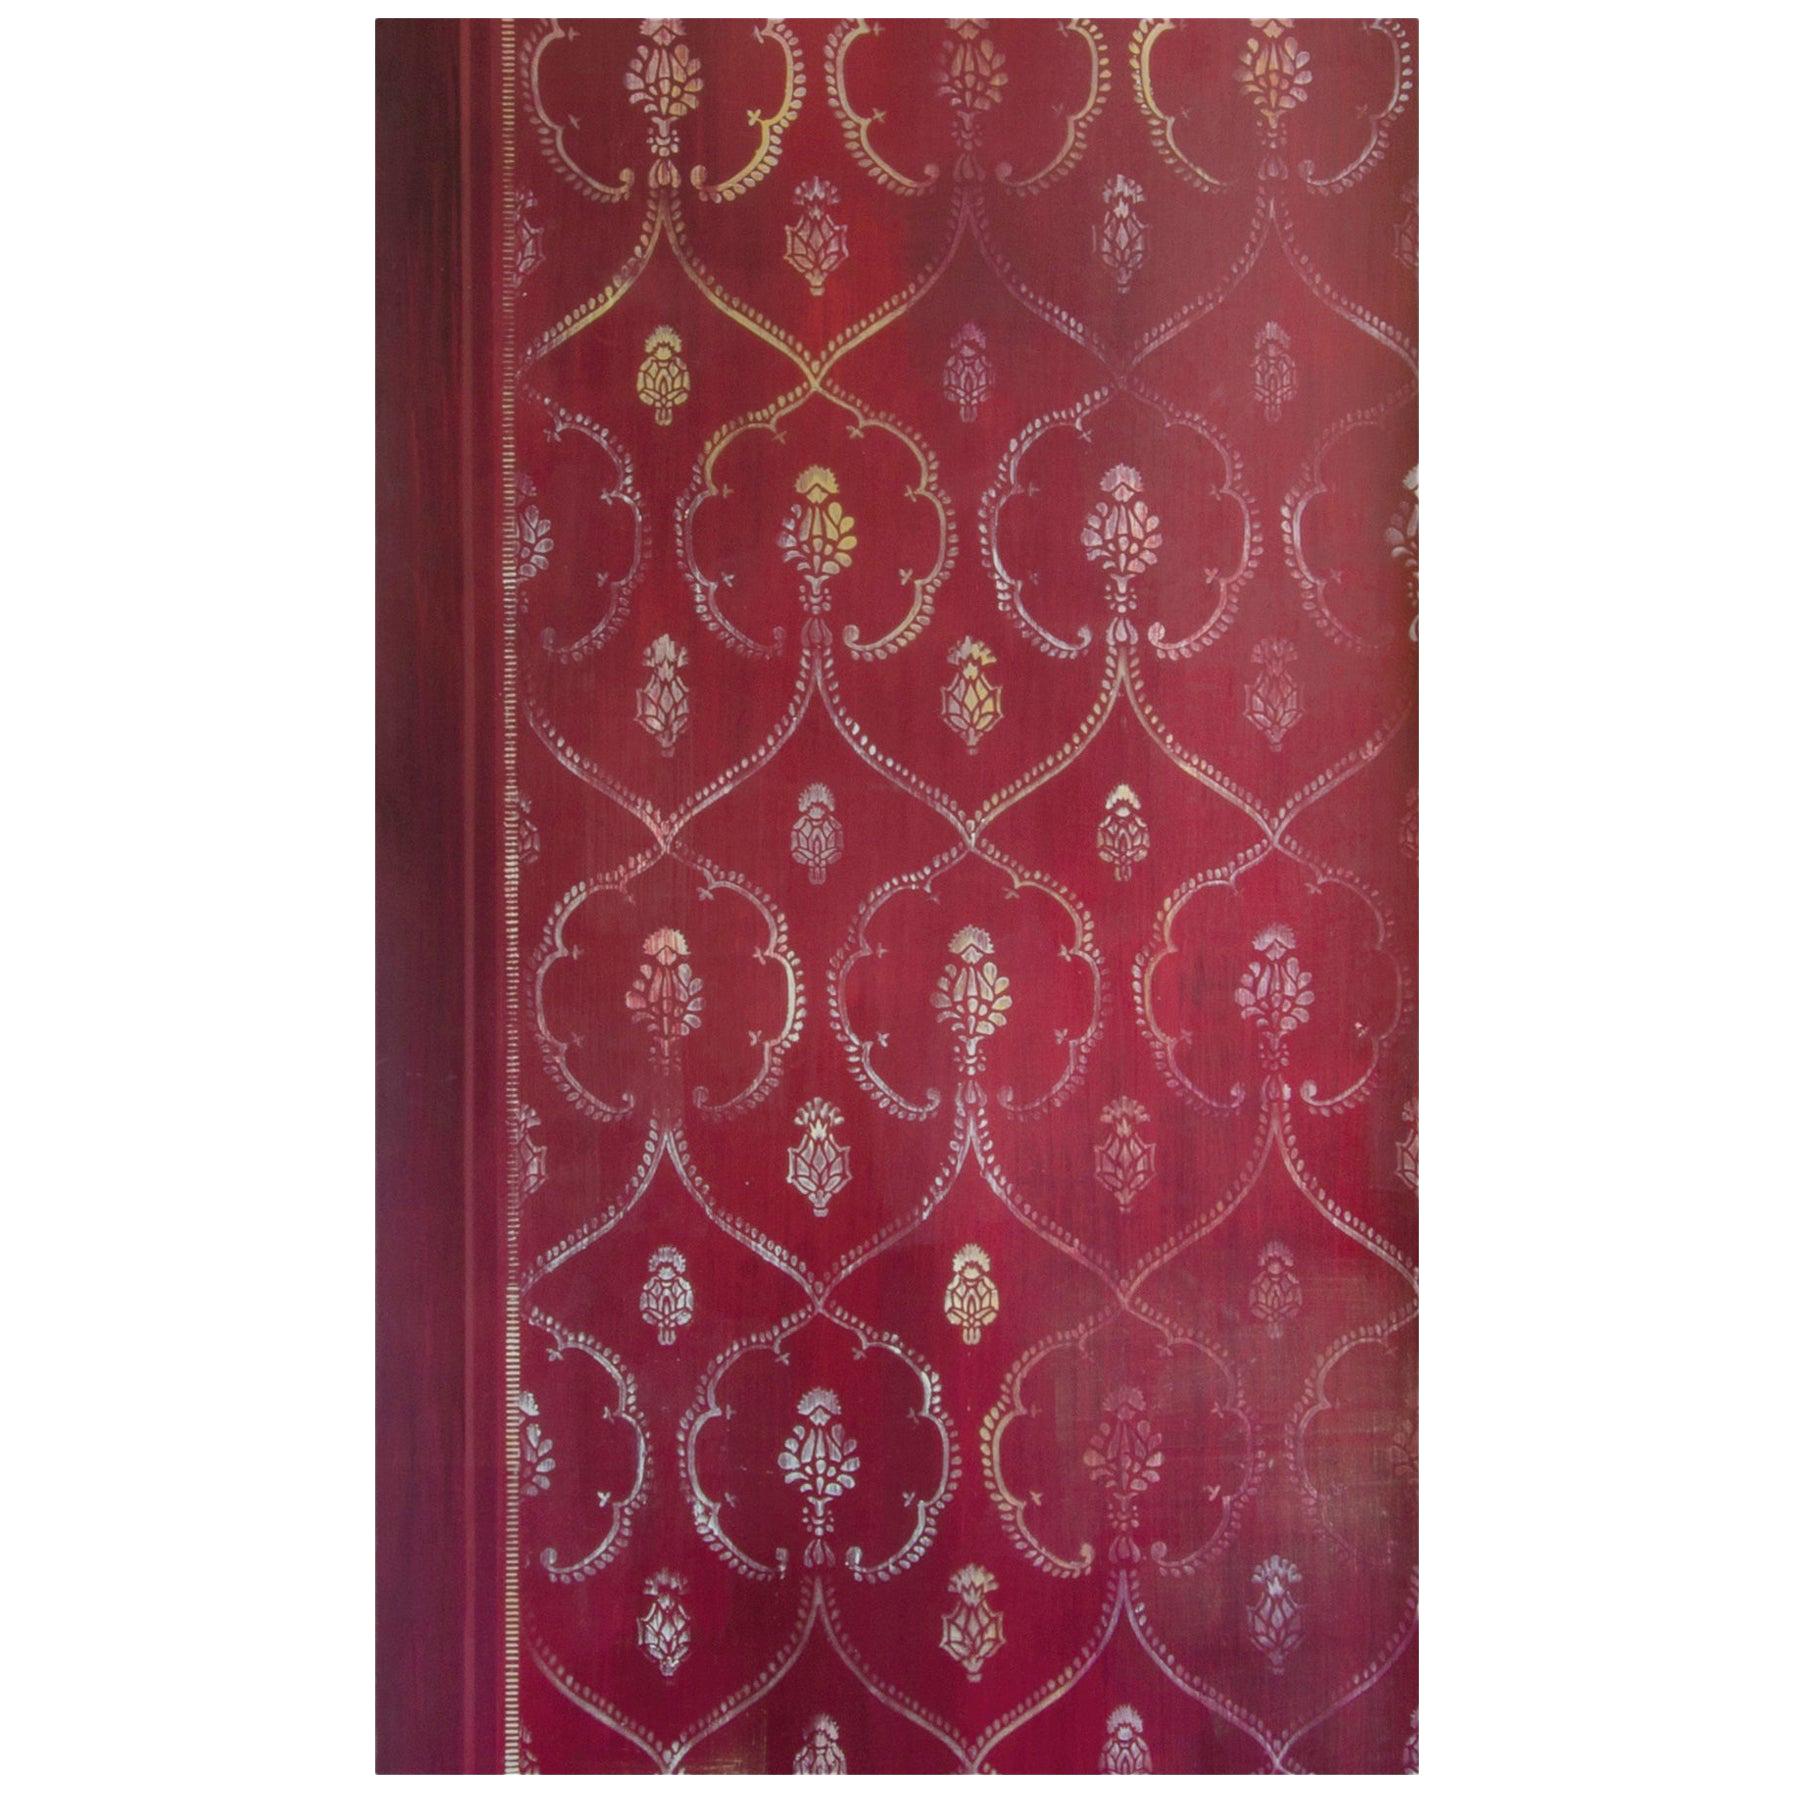 Damasco, Hand Painted Wallpaper - Made in Italy - customizable For Sale